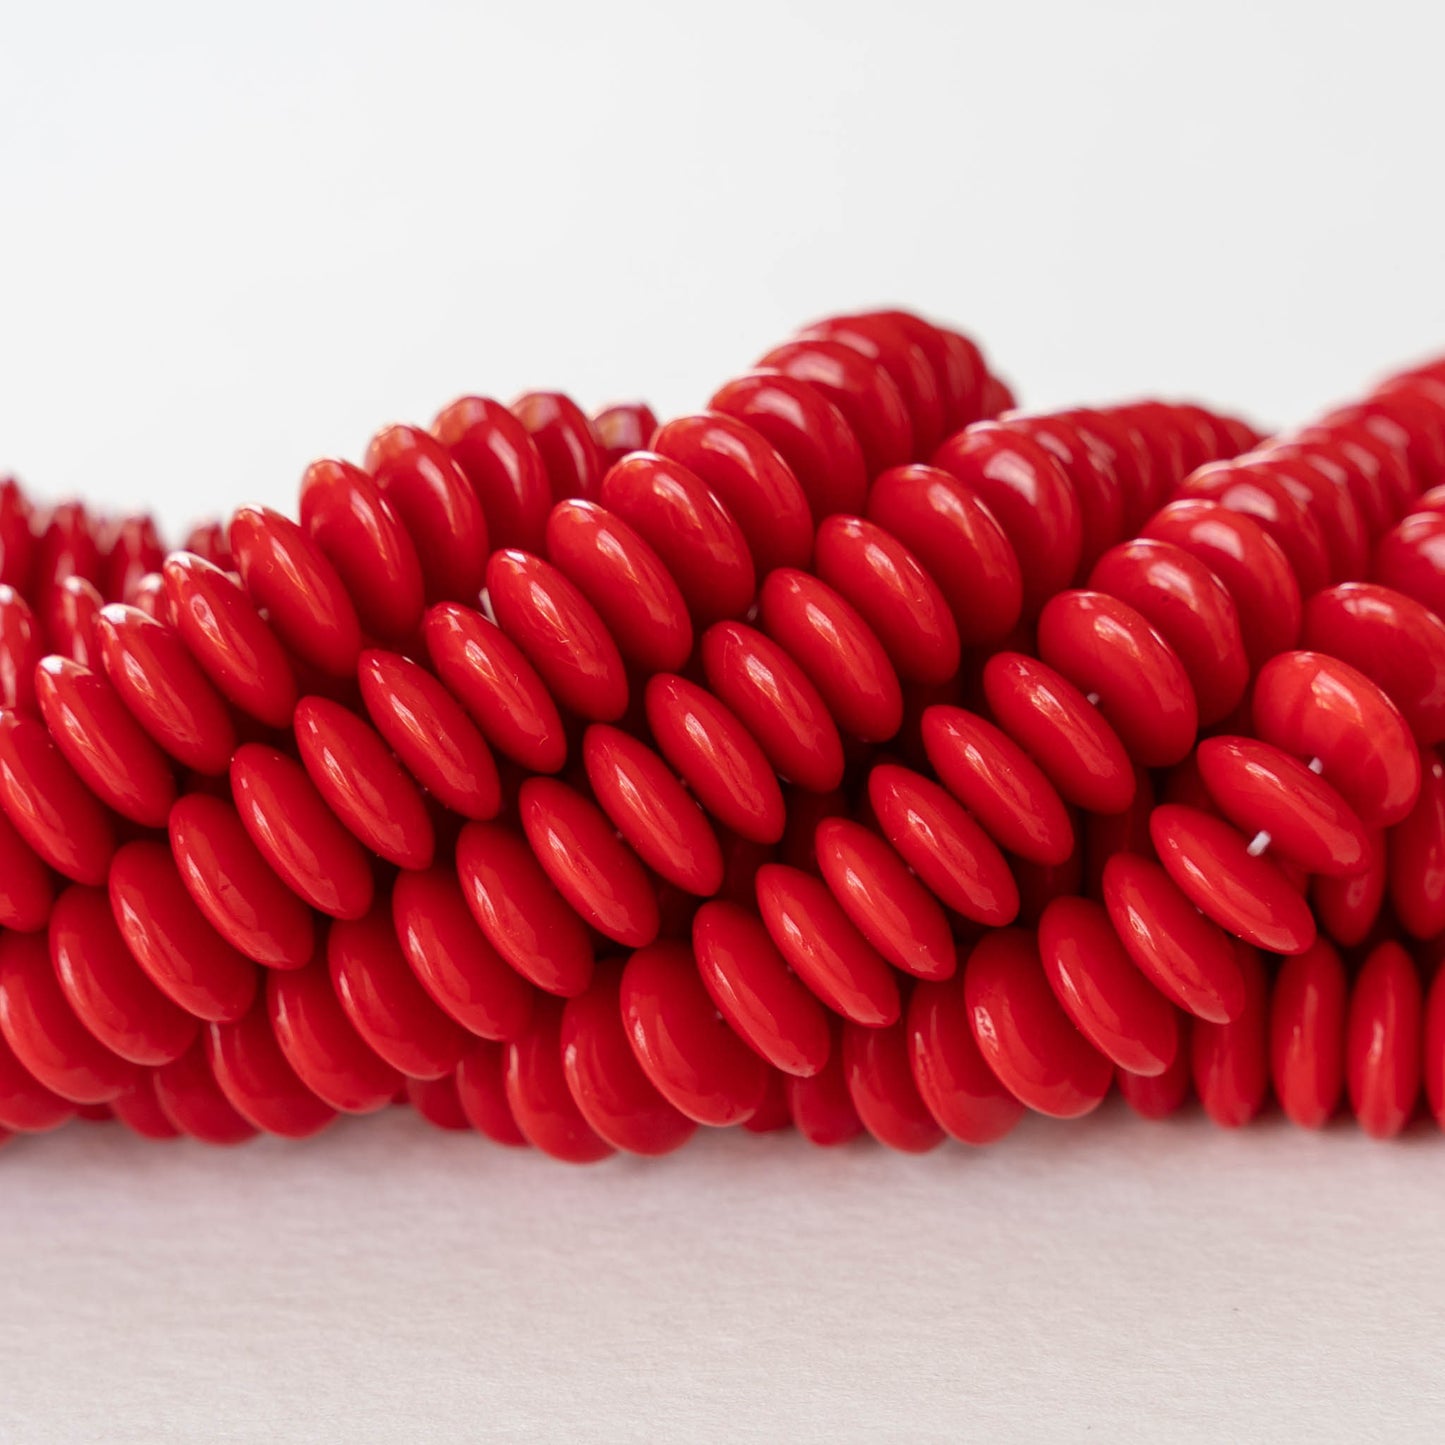 10mm Rondelle Beads - Opaque Red - 30 Beads